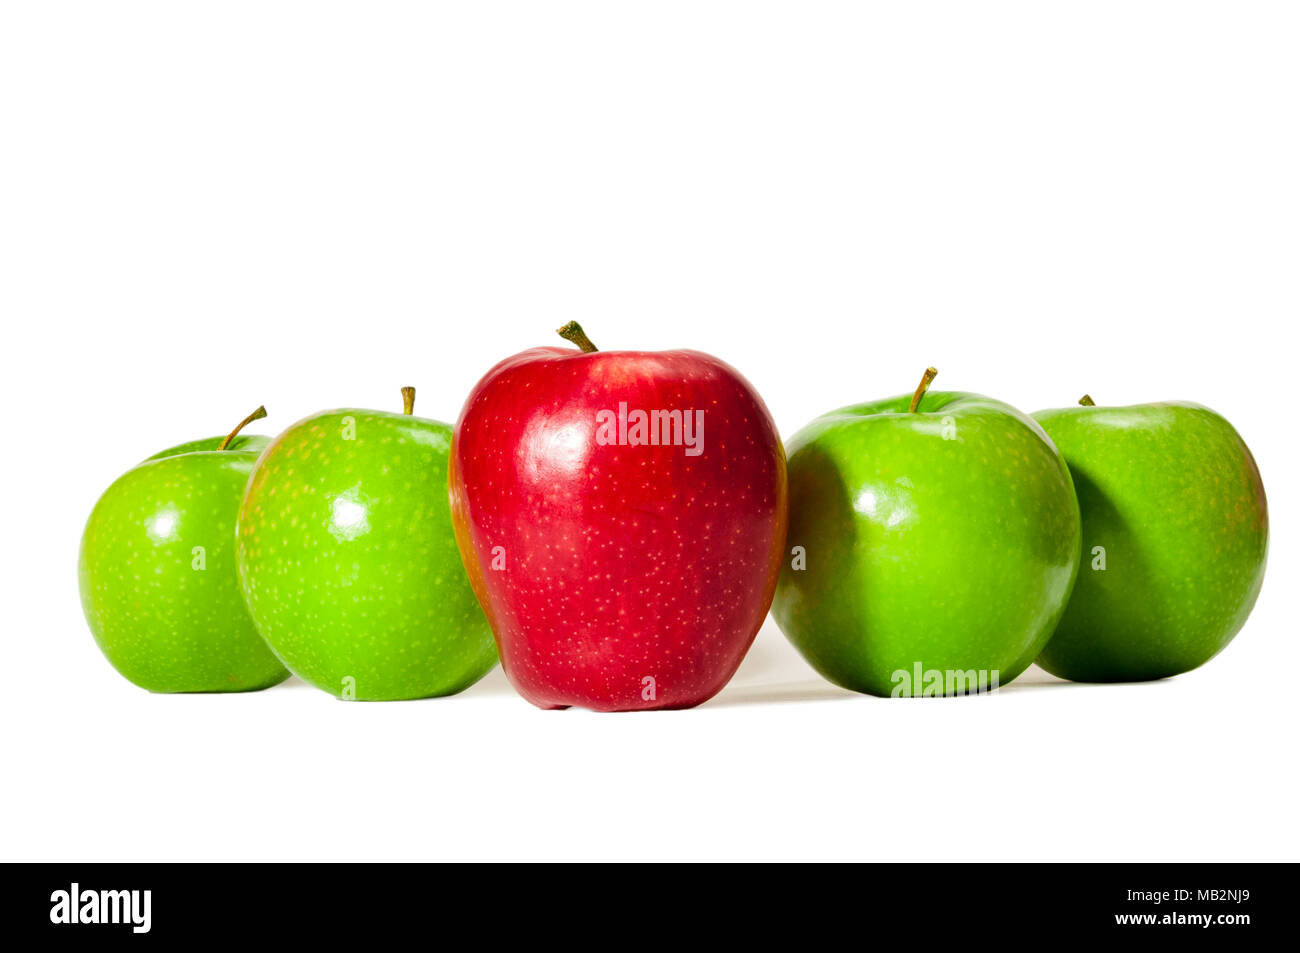 Horizontal straight on shot of one red delicious apple standing in front of four green granny smith apples on a white background. Stock Photo